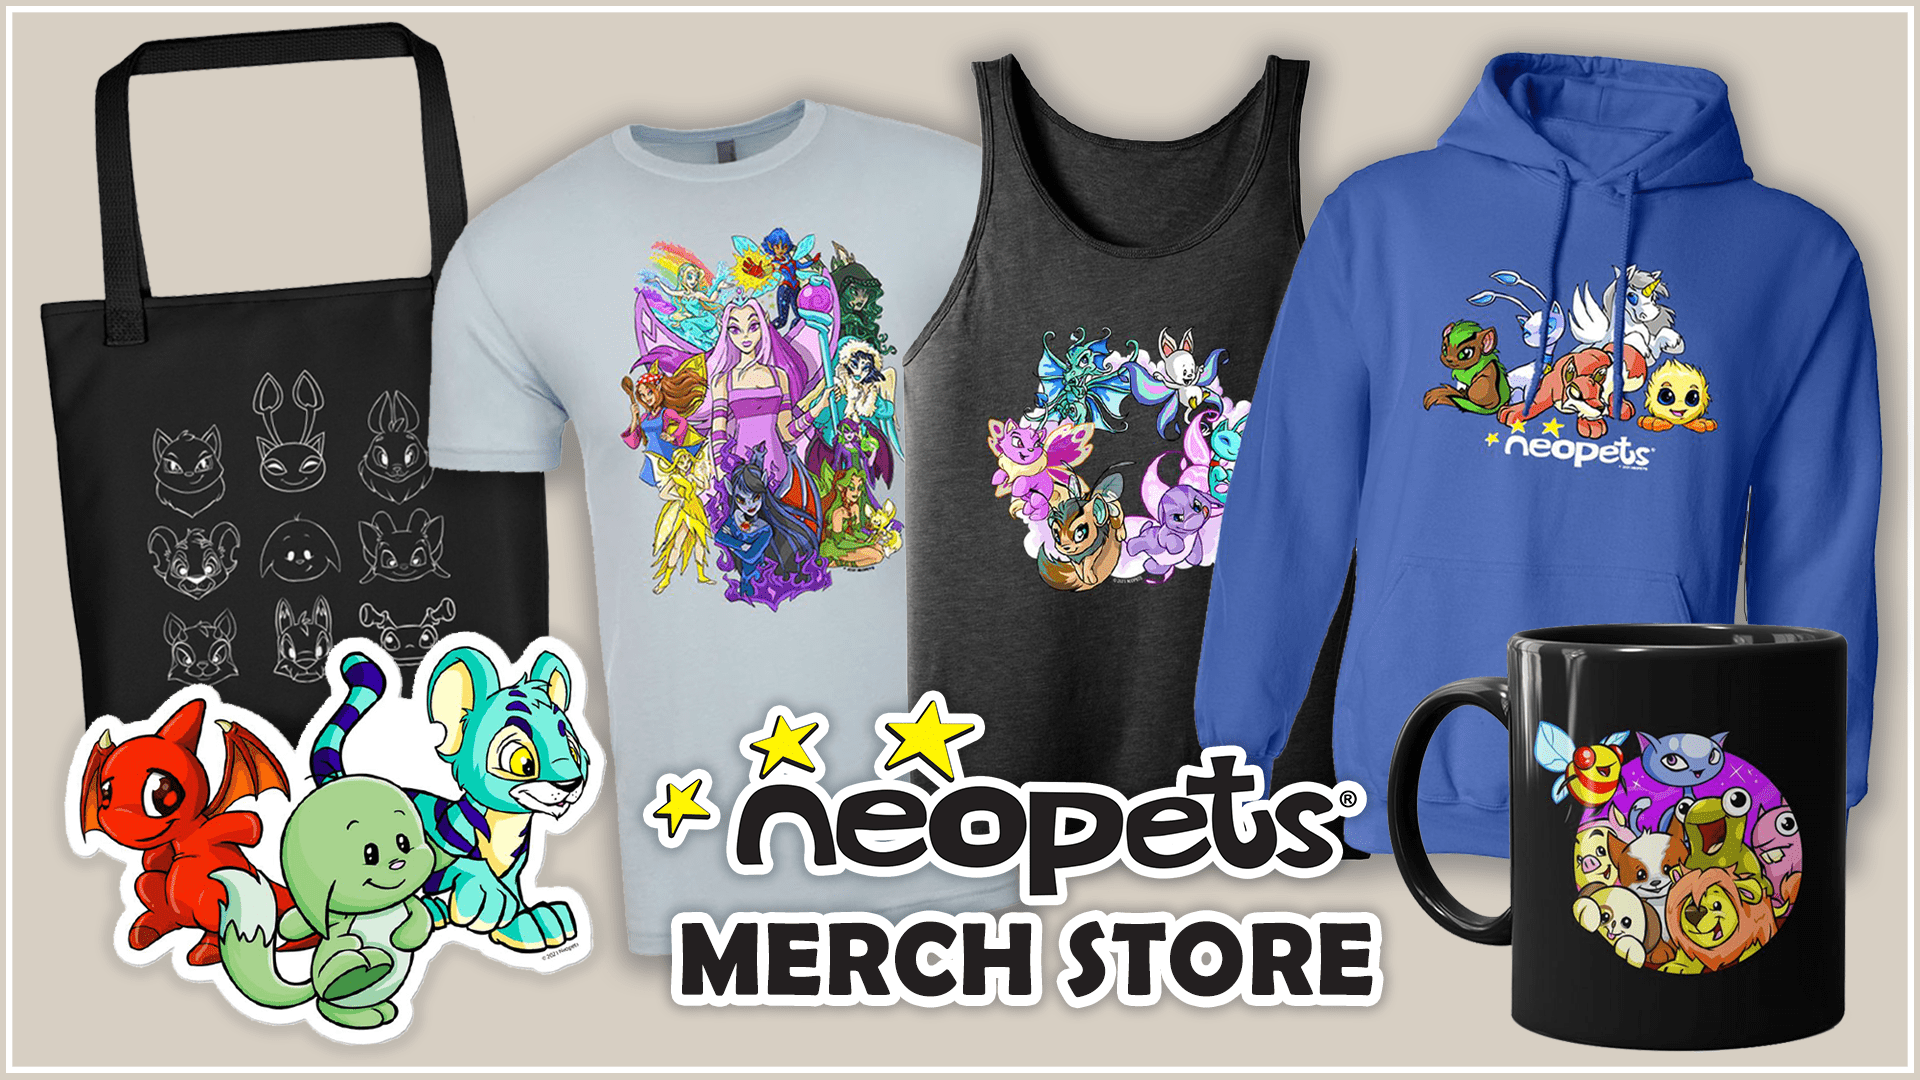 https://images.neopets.com/images/nf/merchstore.png